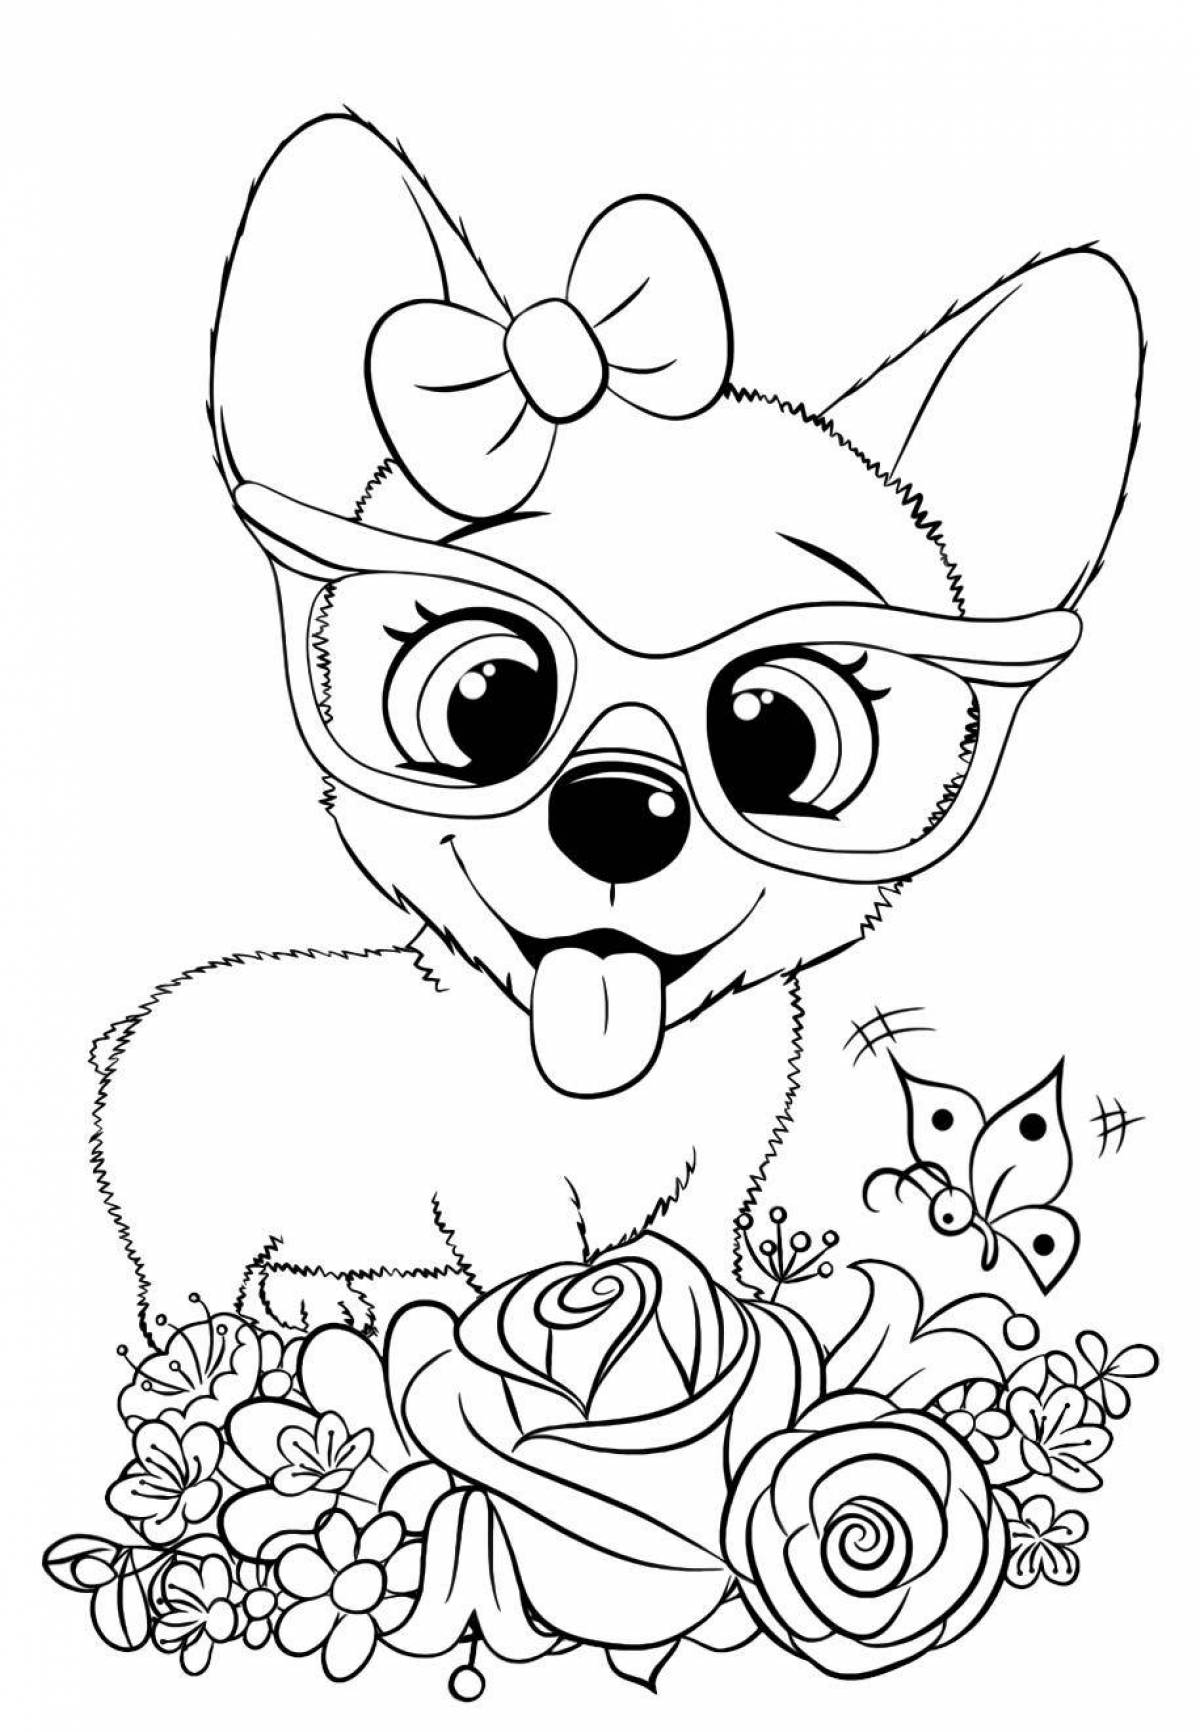 Adorable coloring book dog with a bow